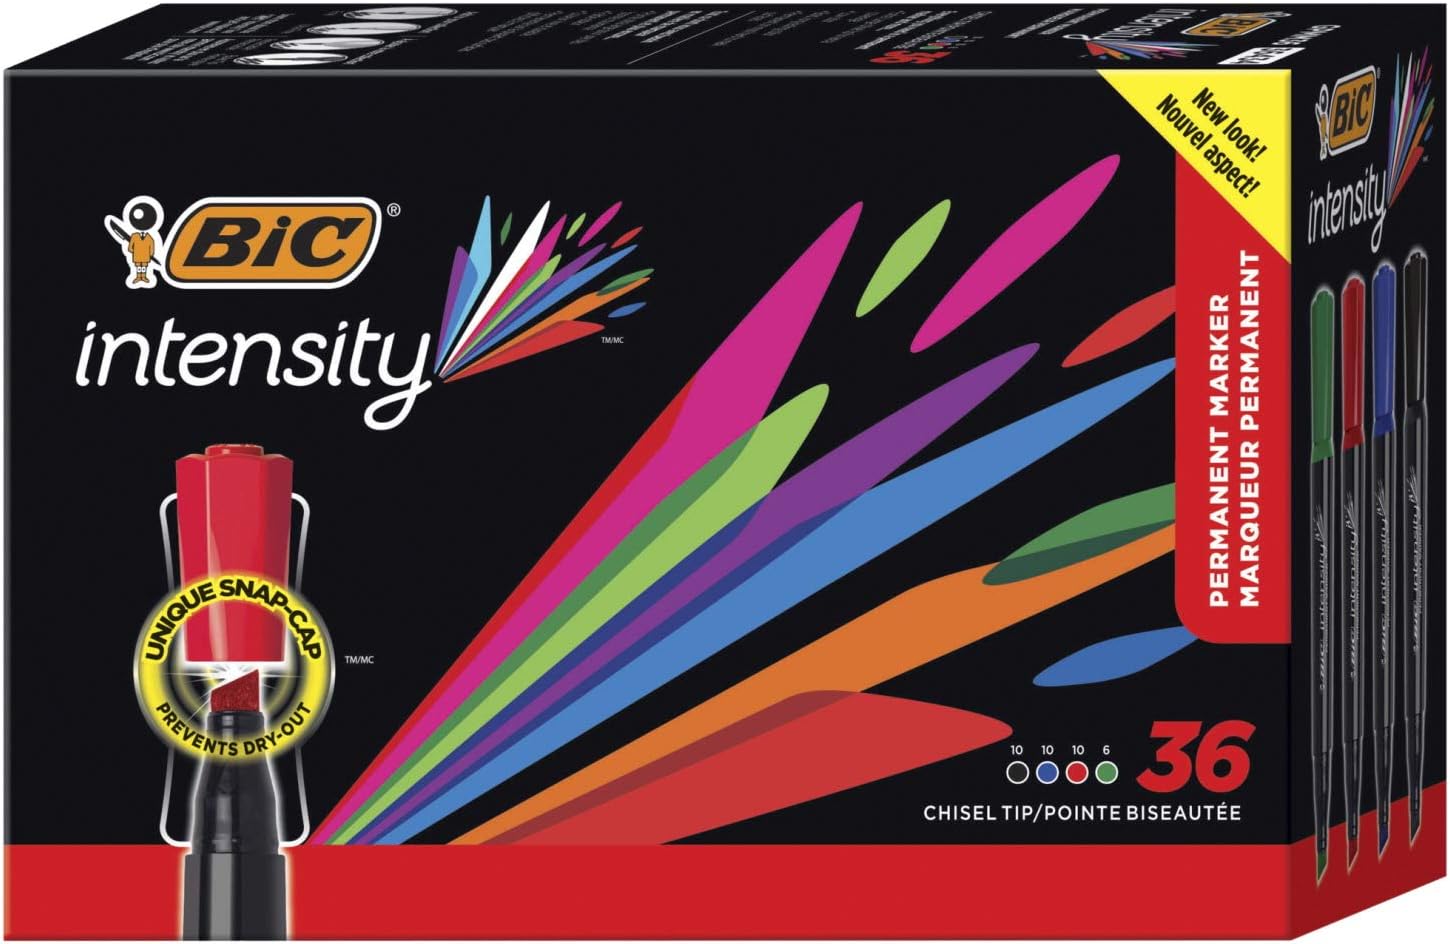 BIC Intensity Permanent Marker, Tank style, Chisel Tip - Box of 36 Assorted Markers